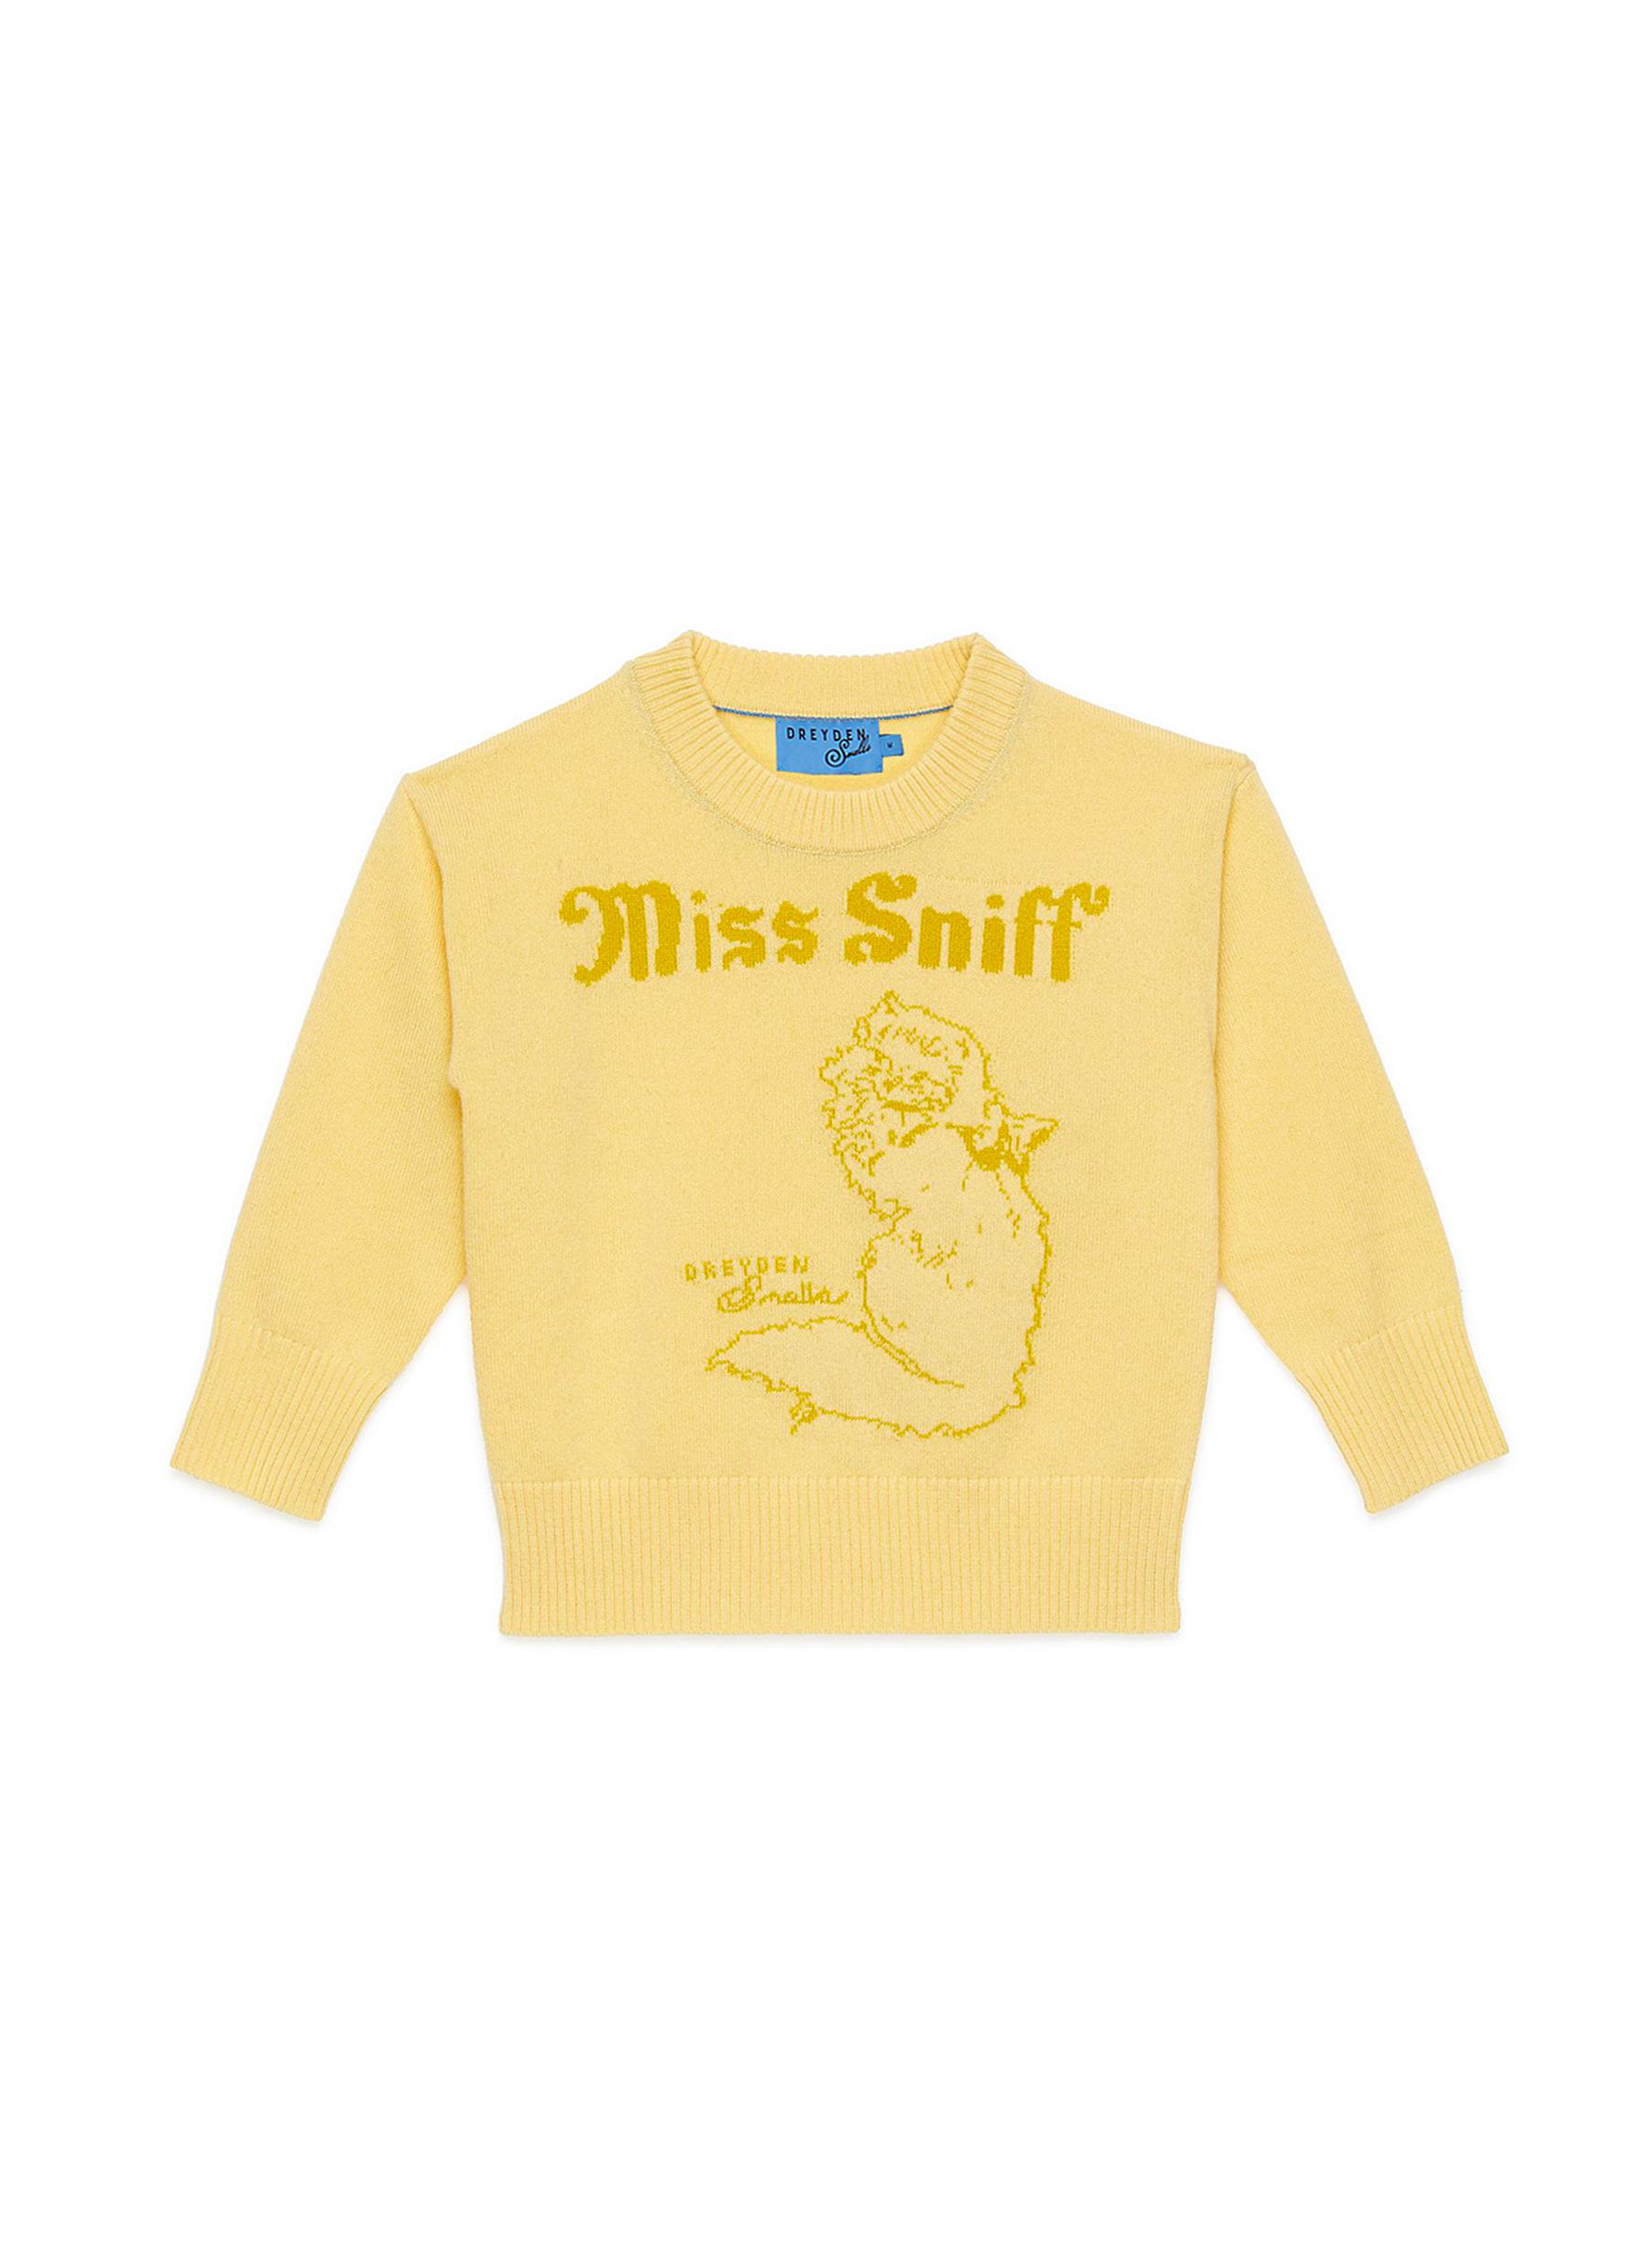 'Miss Sniff' Graphic Cashmere Knit Kids Sweater